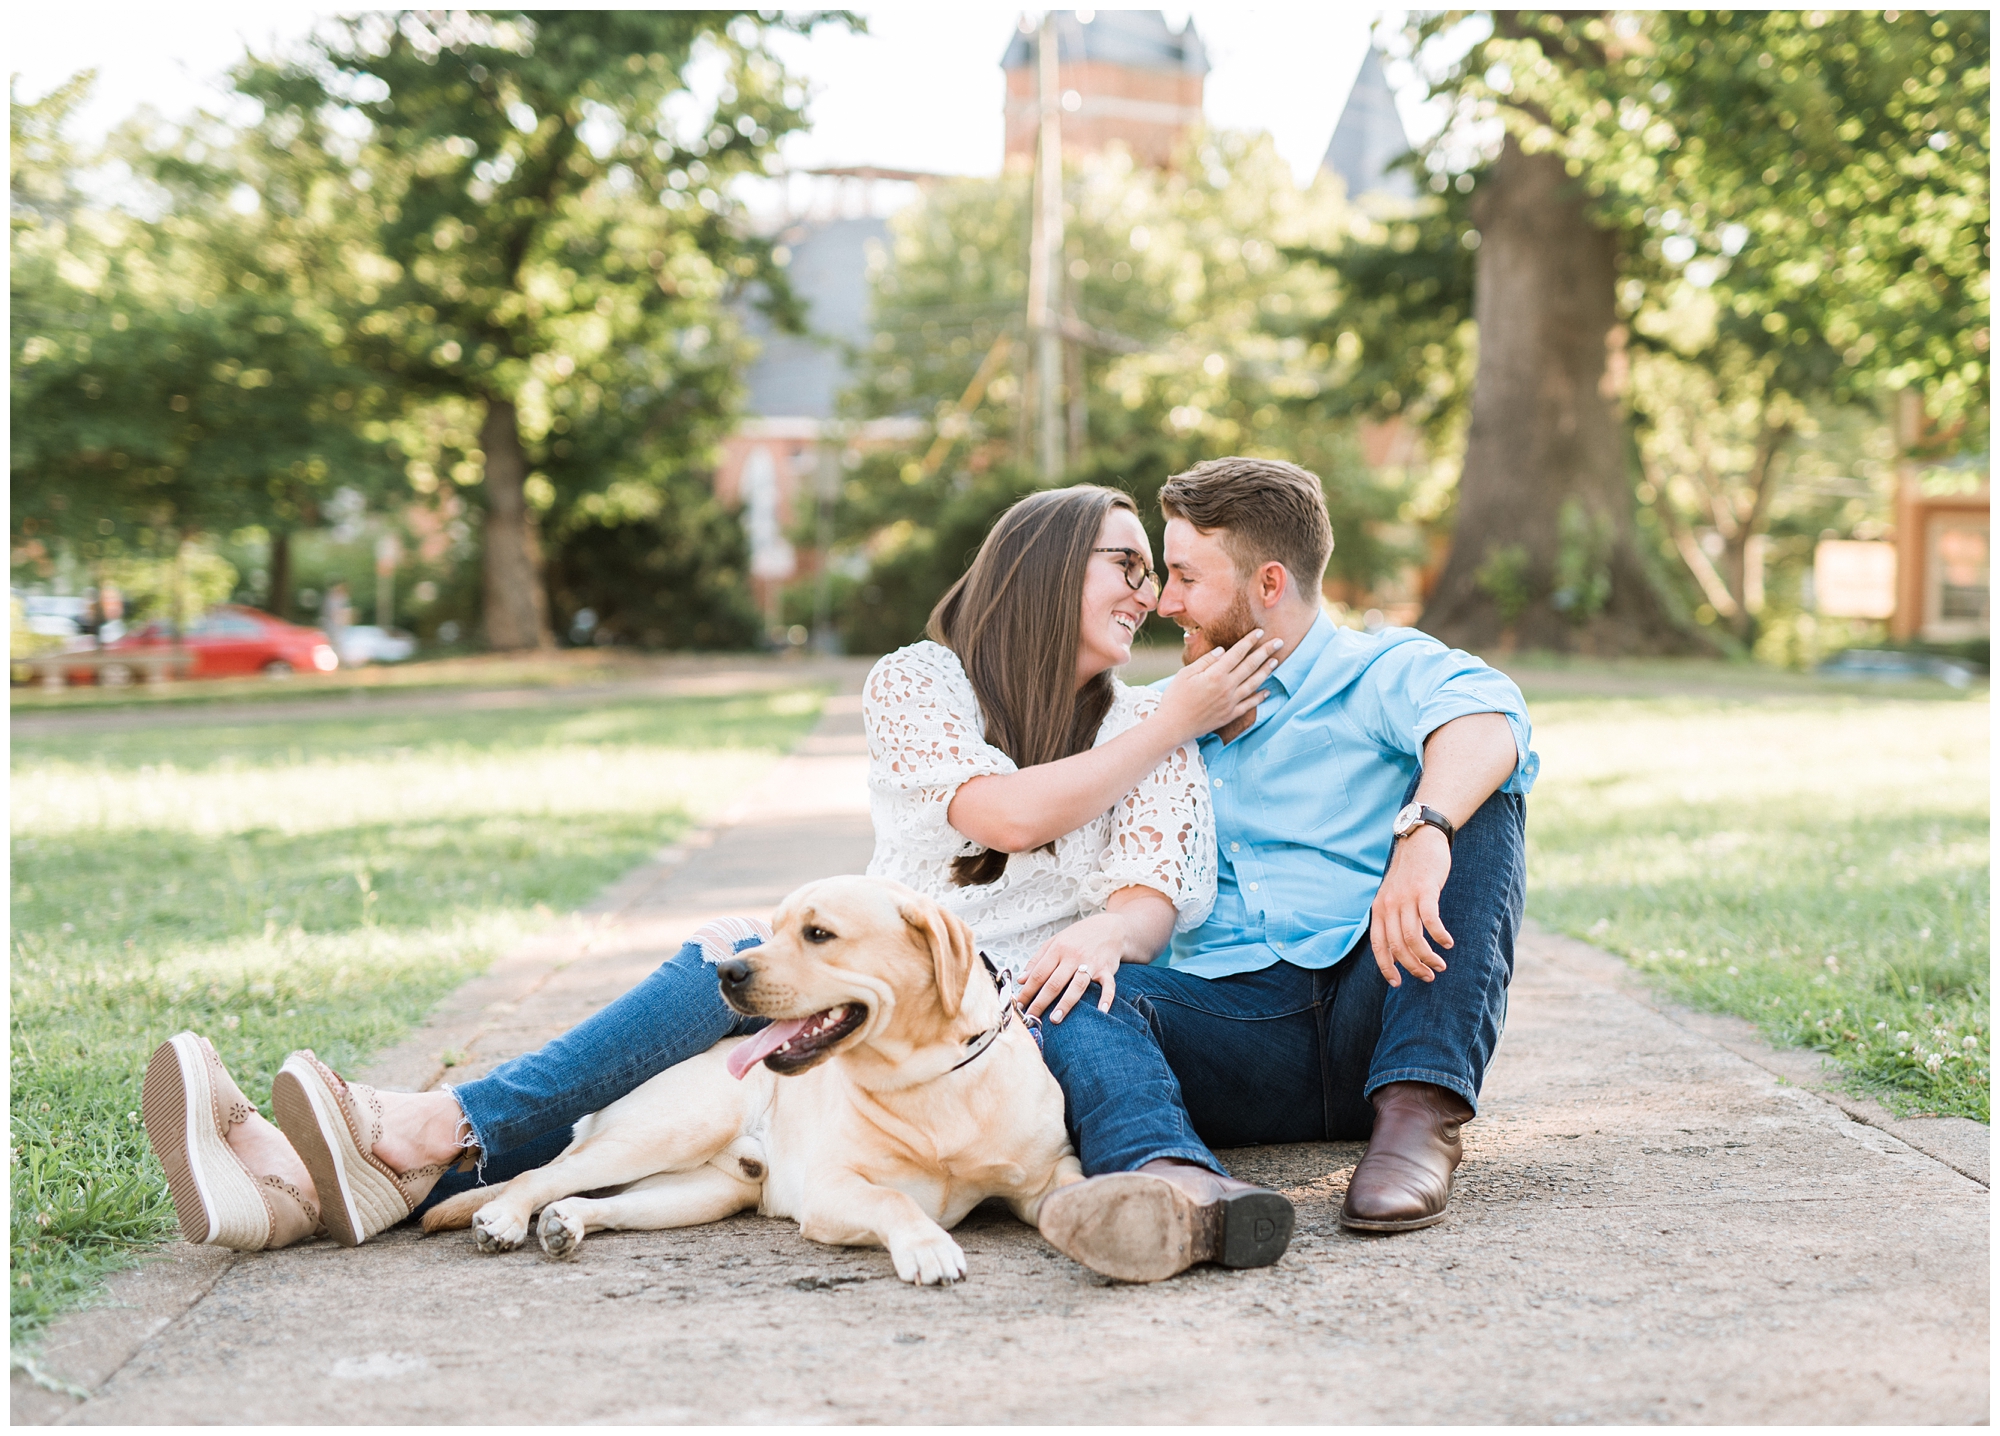 Engaged couple photoshoot with their dog in Virginia